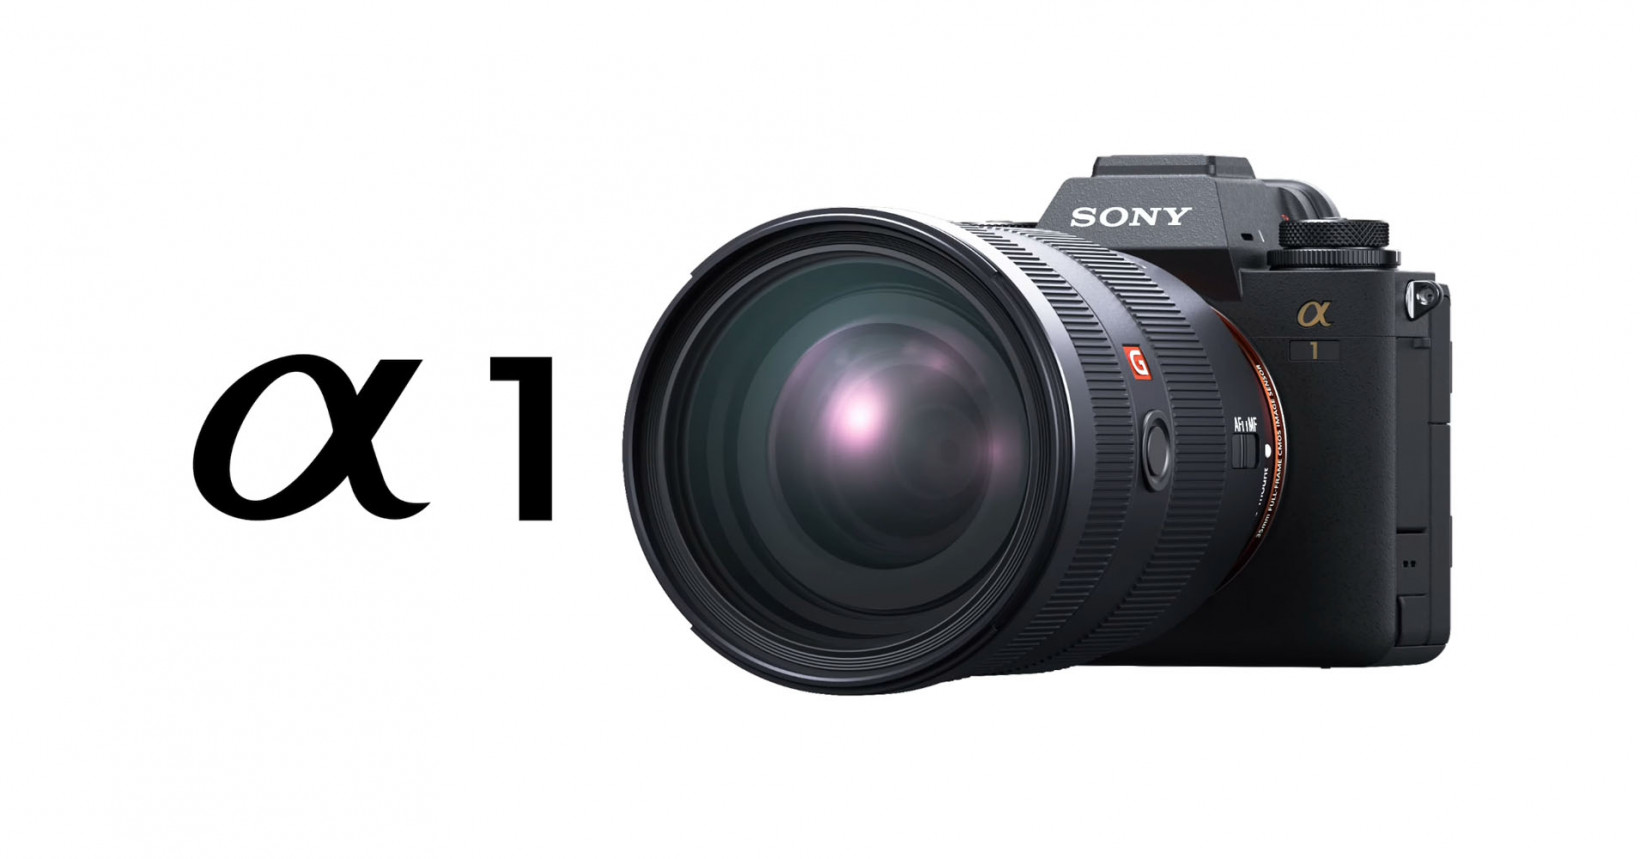 Voorspellen Kreta Taalkunde Sony's $6,498 a1 is an overkill camera for photo and video pros